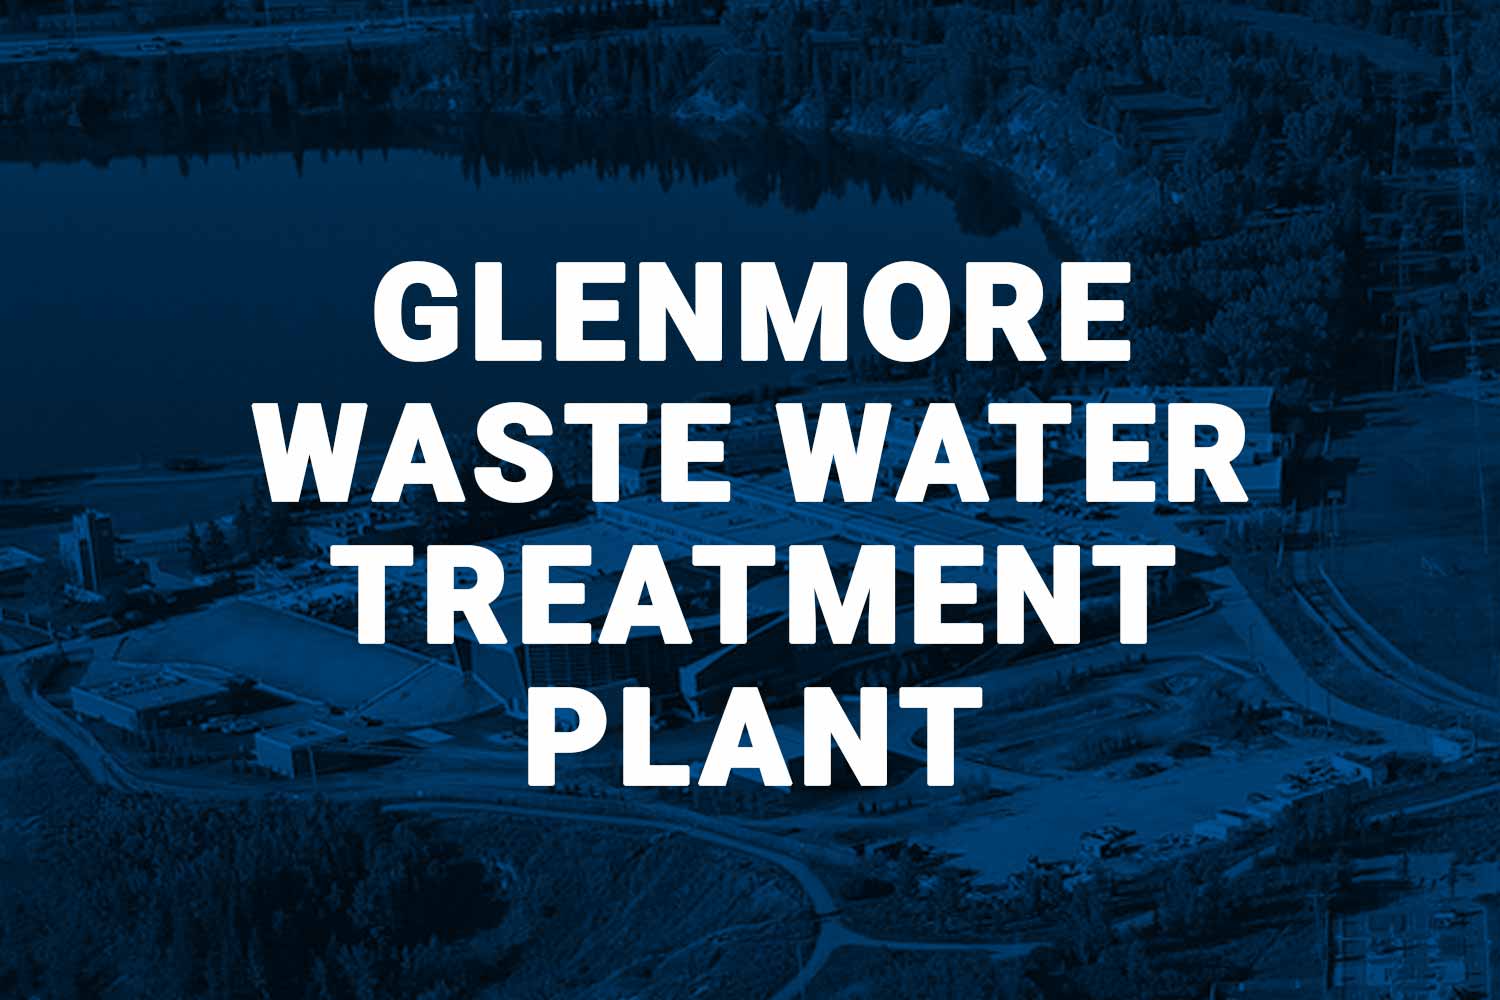 Glenmore Waste Water Treatment